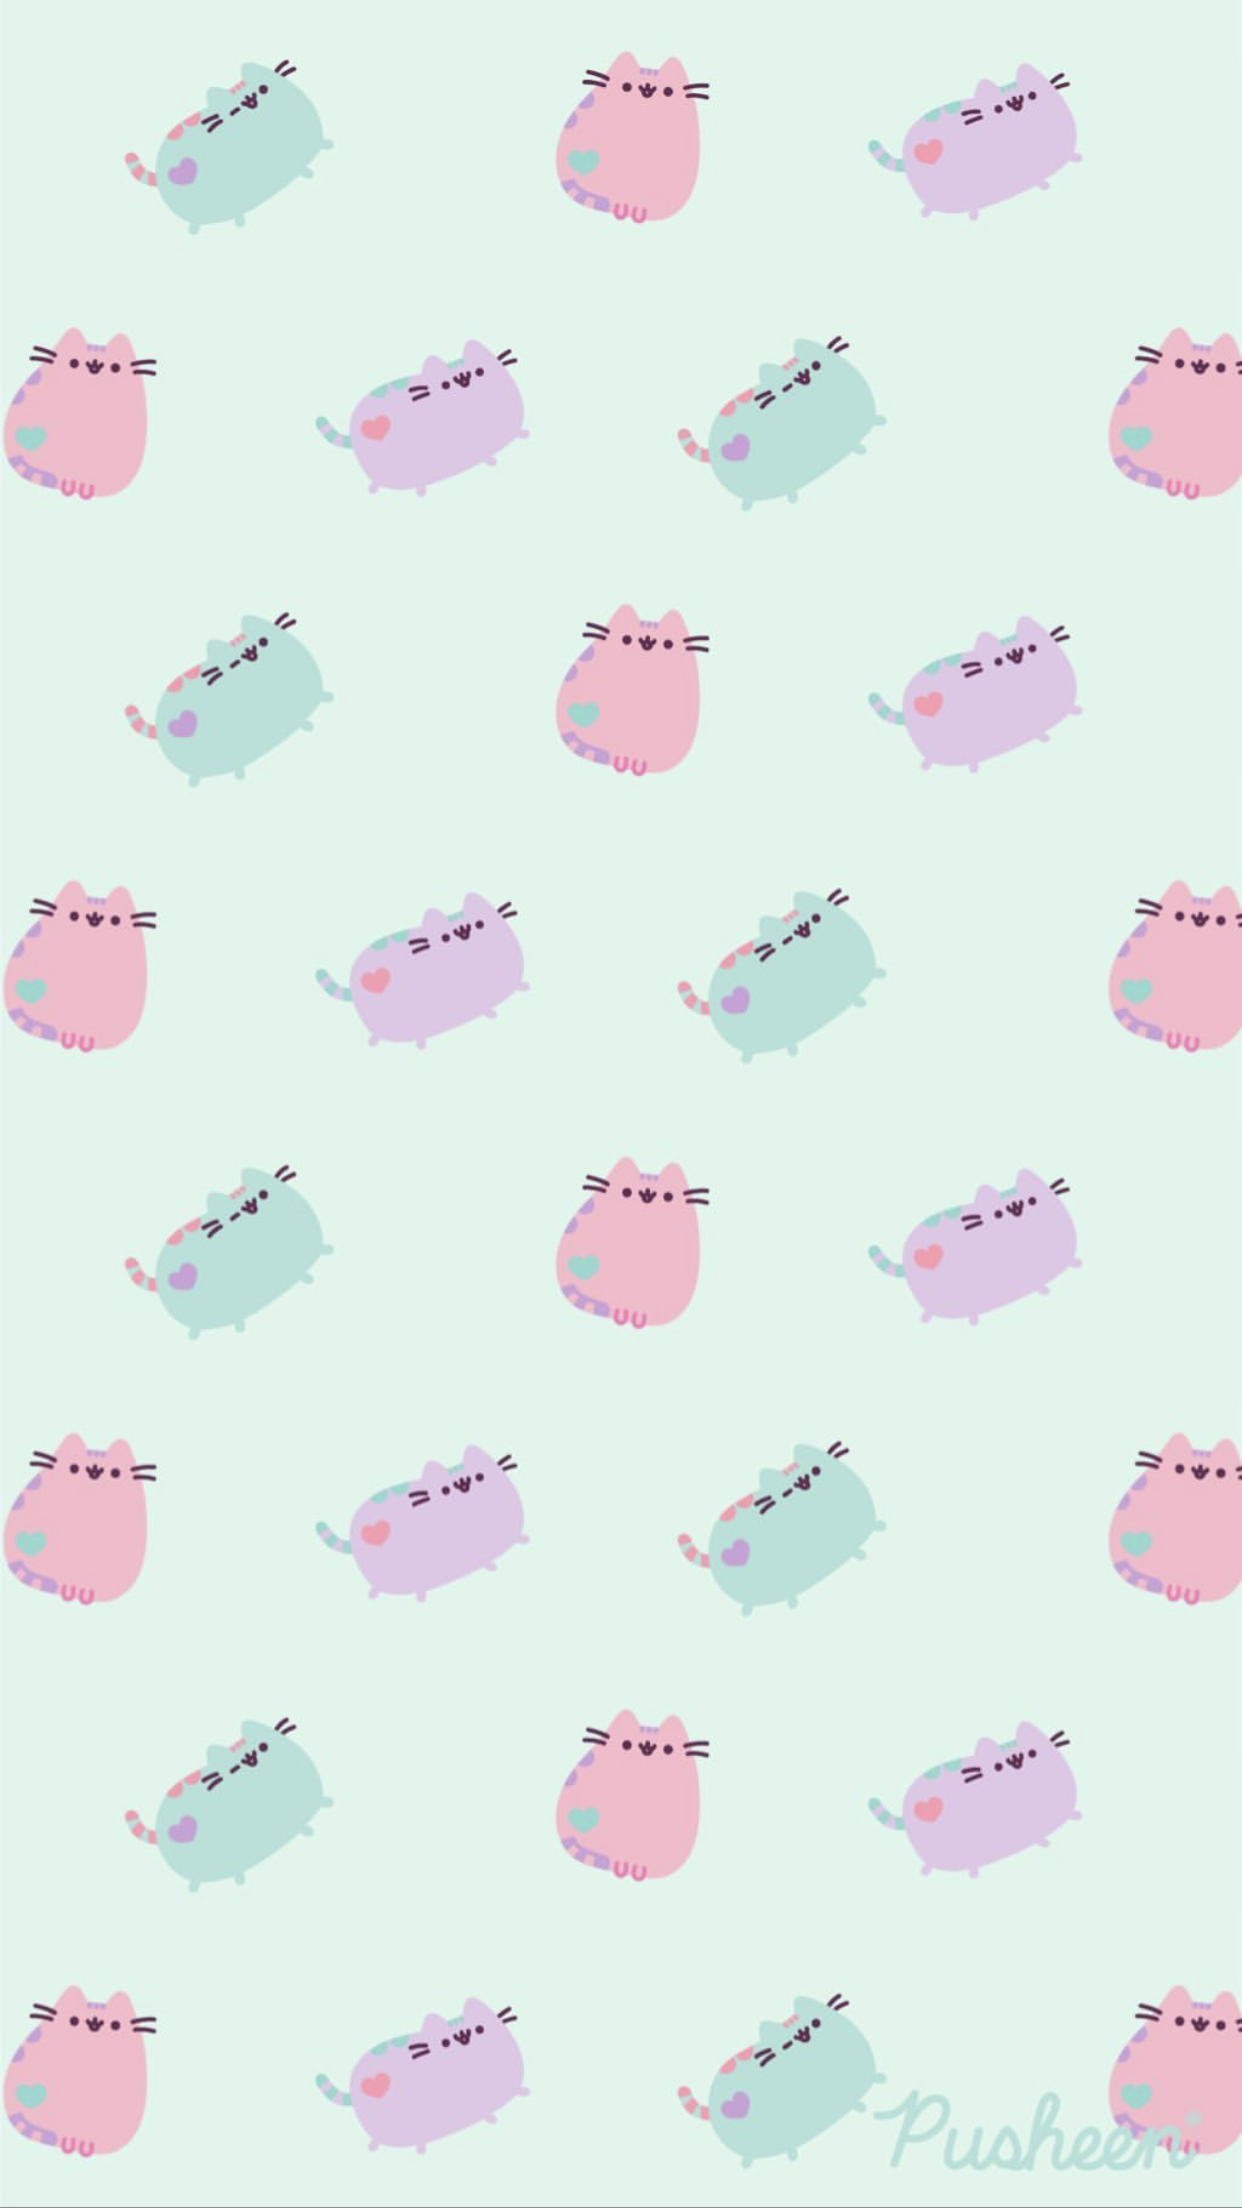 Pusheen the cat floral pastels spring iphone wallpaper. Holiday